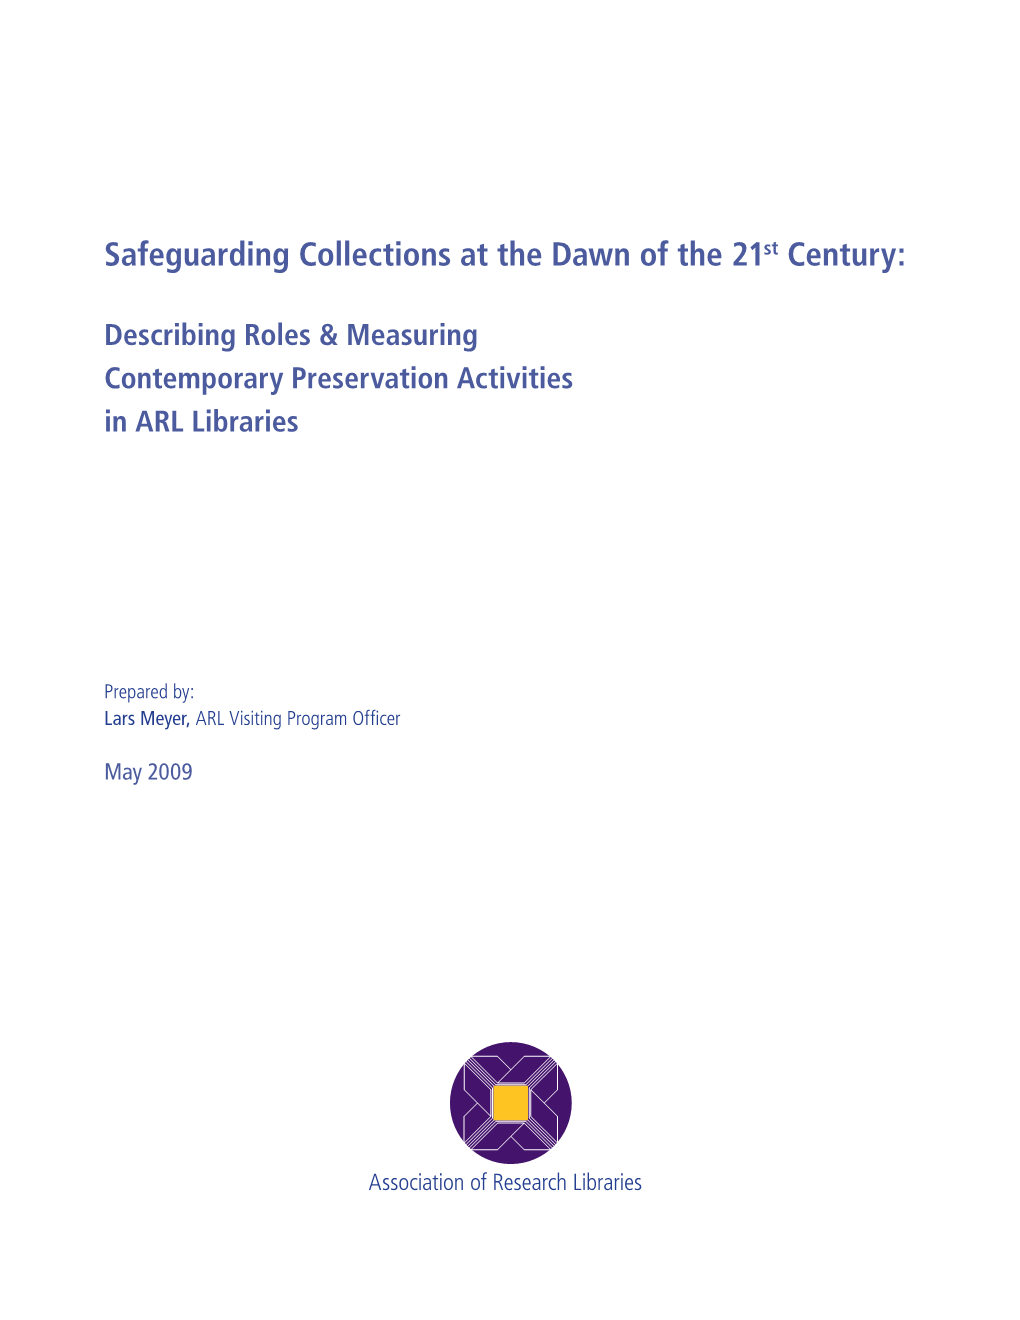 Safeguarding Collections at the Dawn of the 21St Century